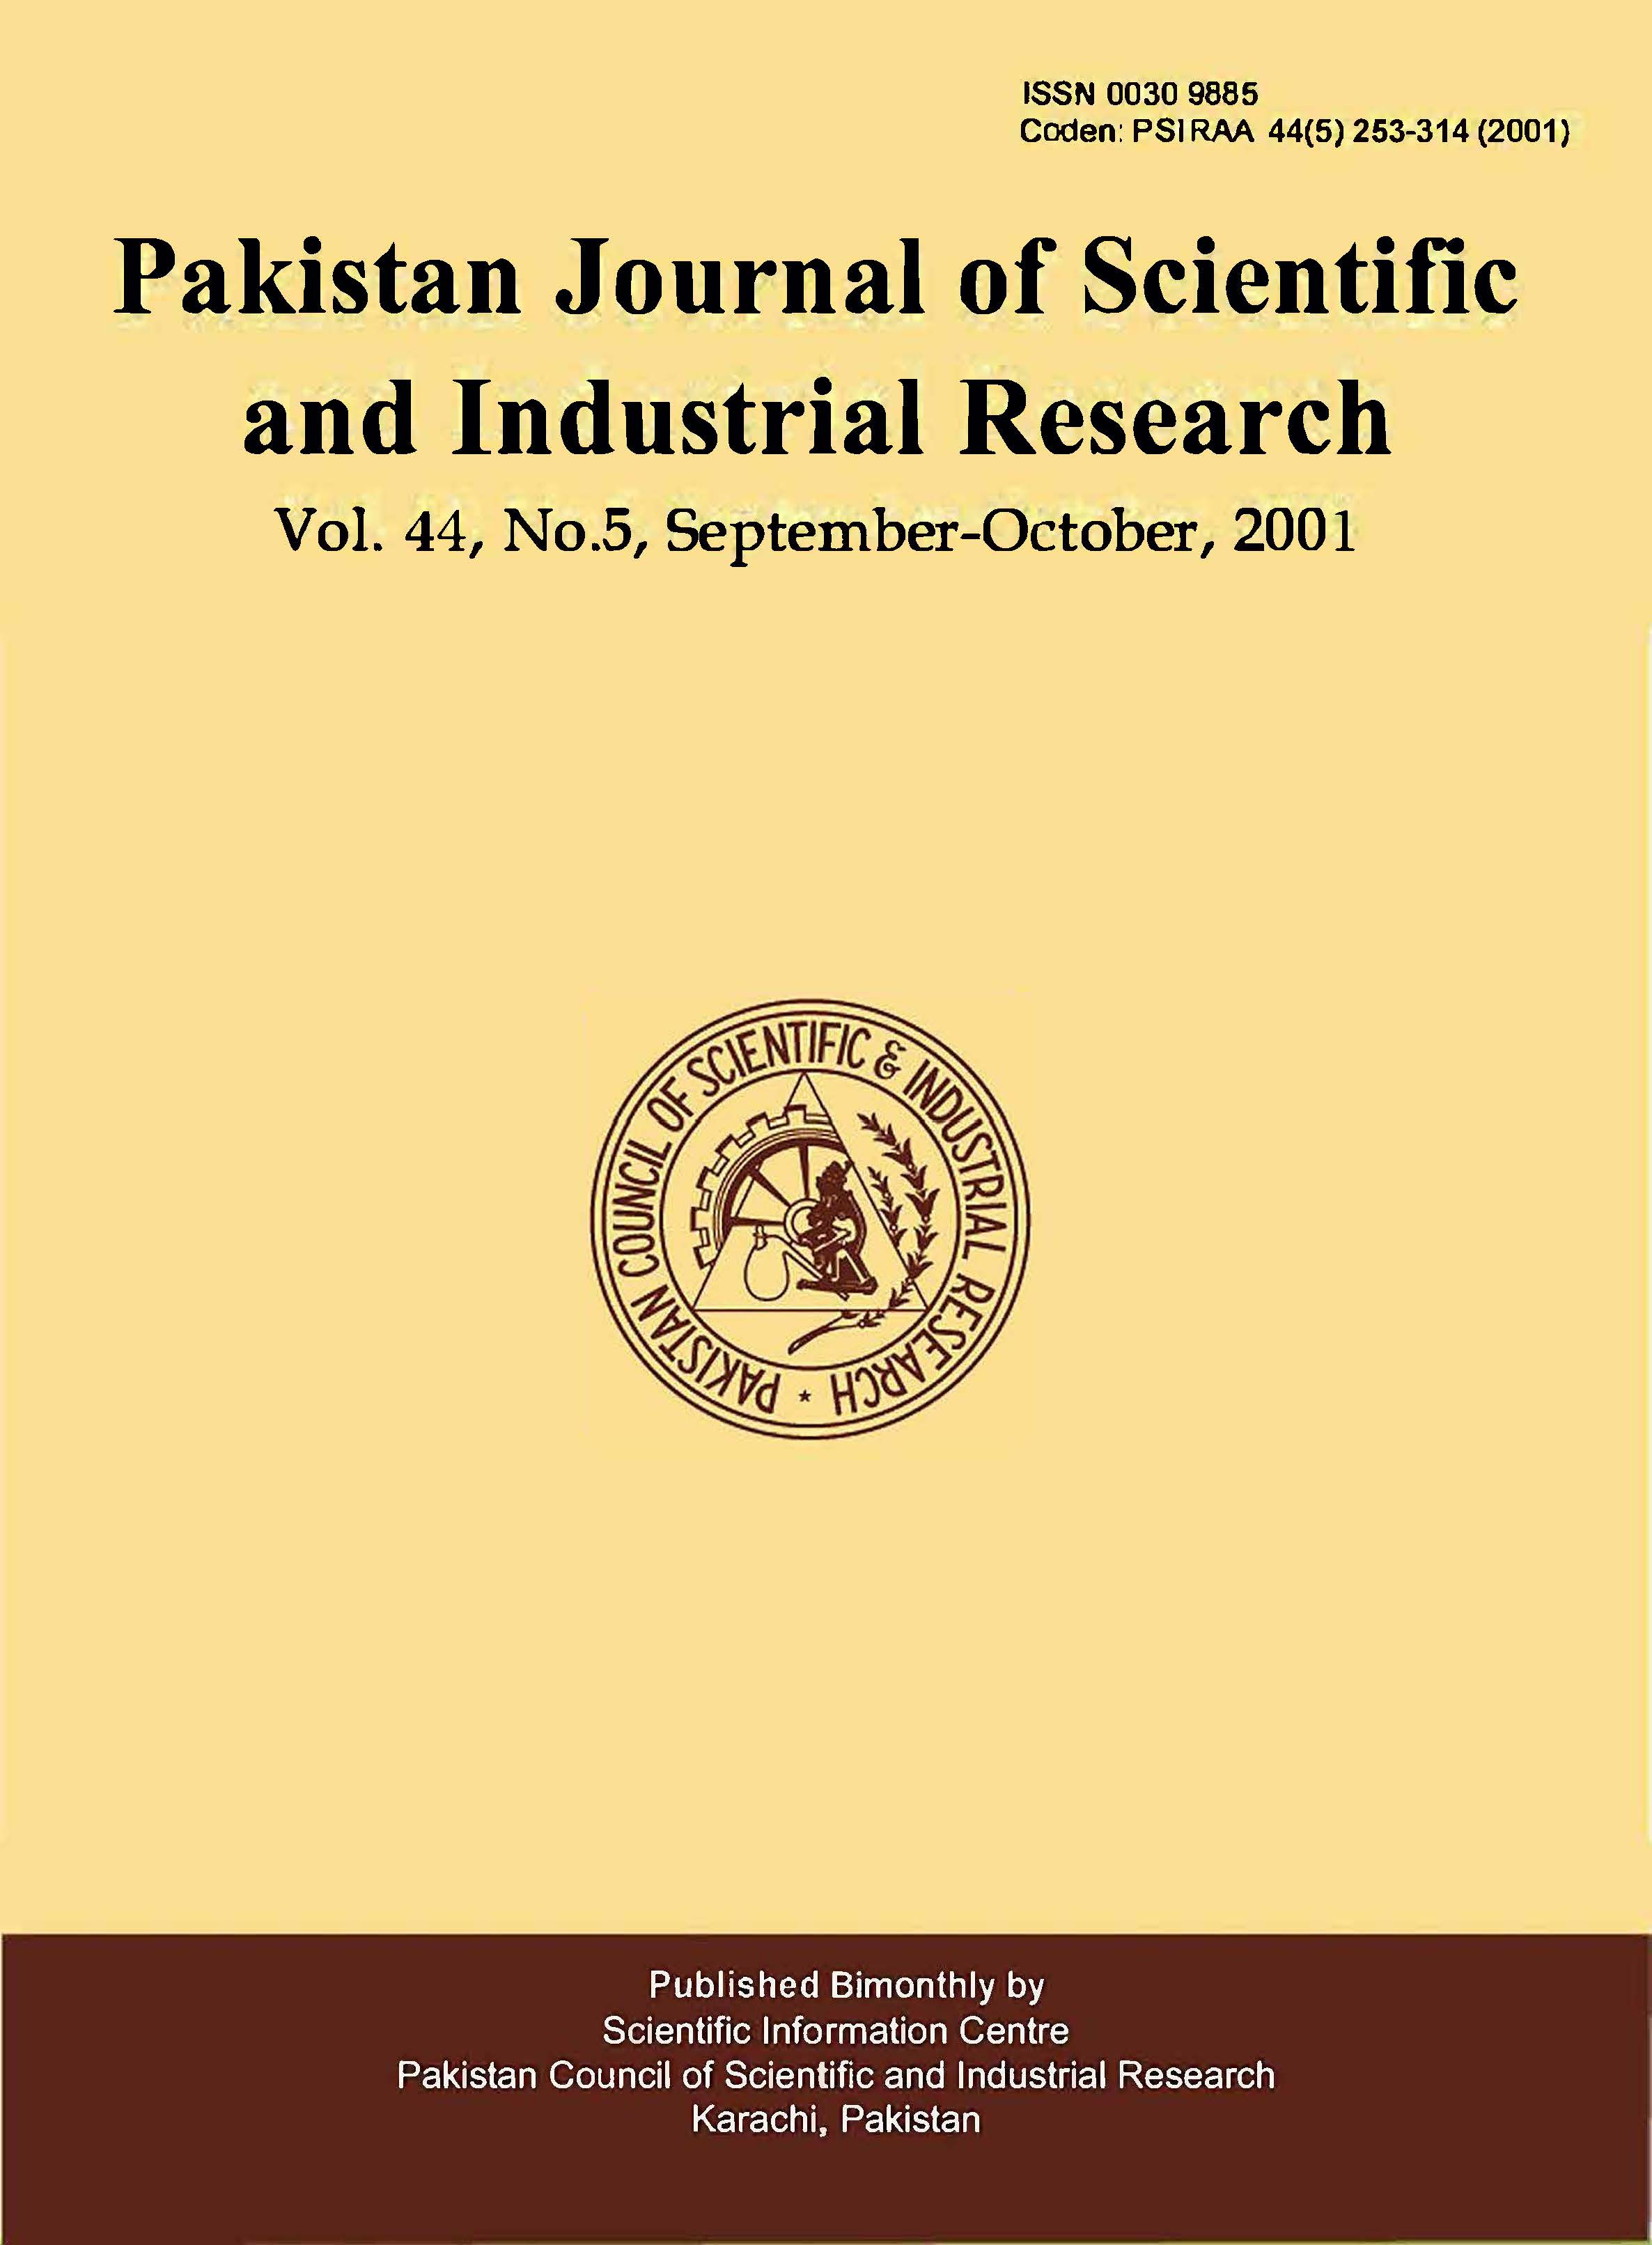 					View Vol. 44 No. 5 (2001): Pakistan Journal of Scientific and Industrial Research
				